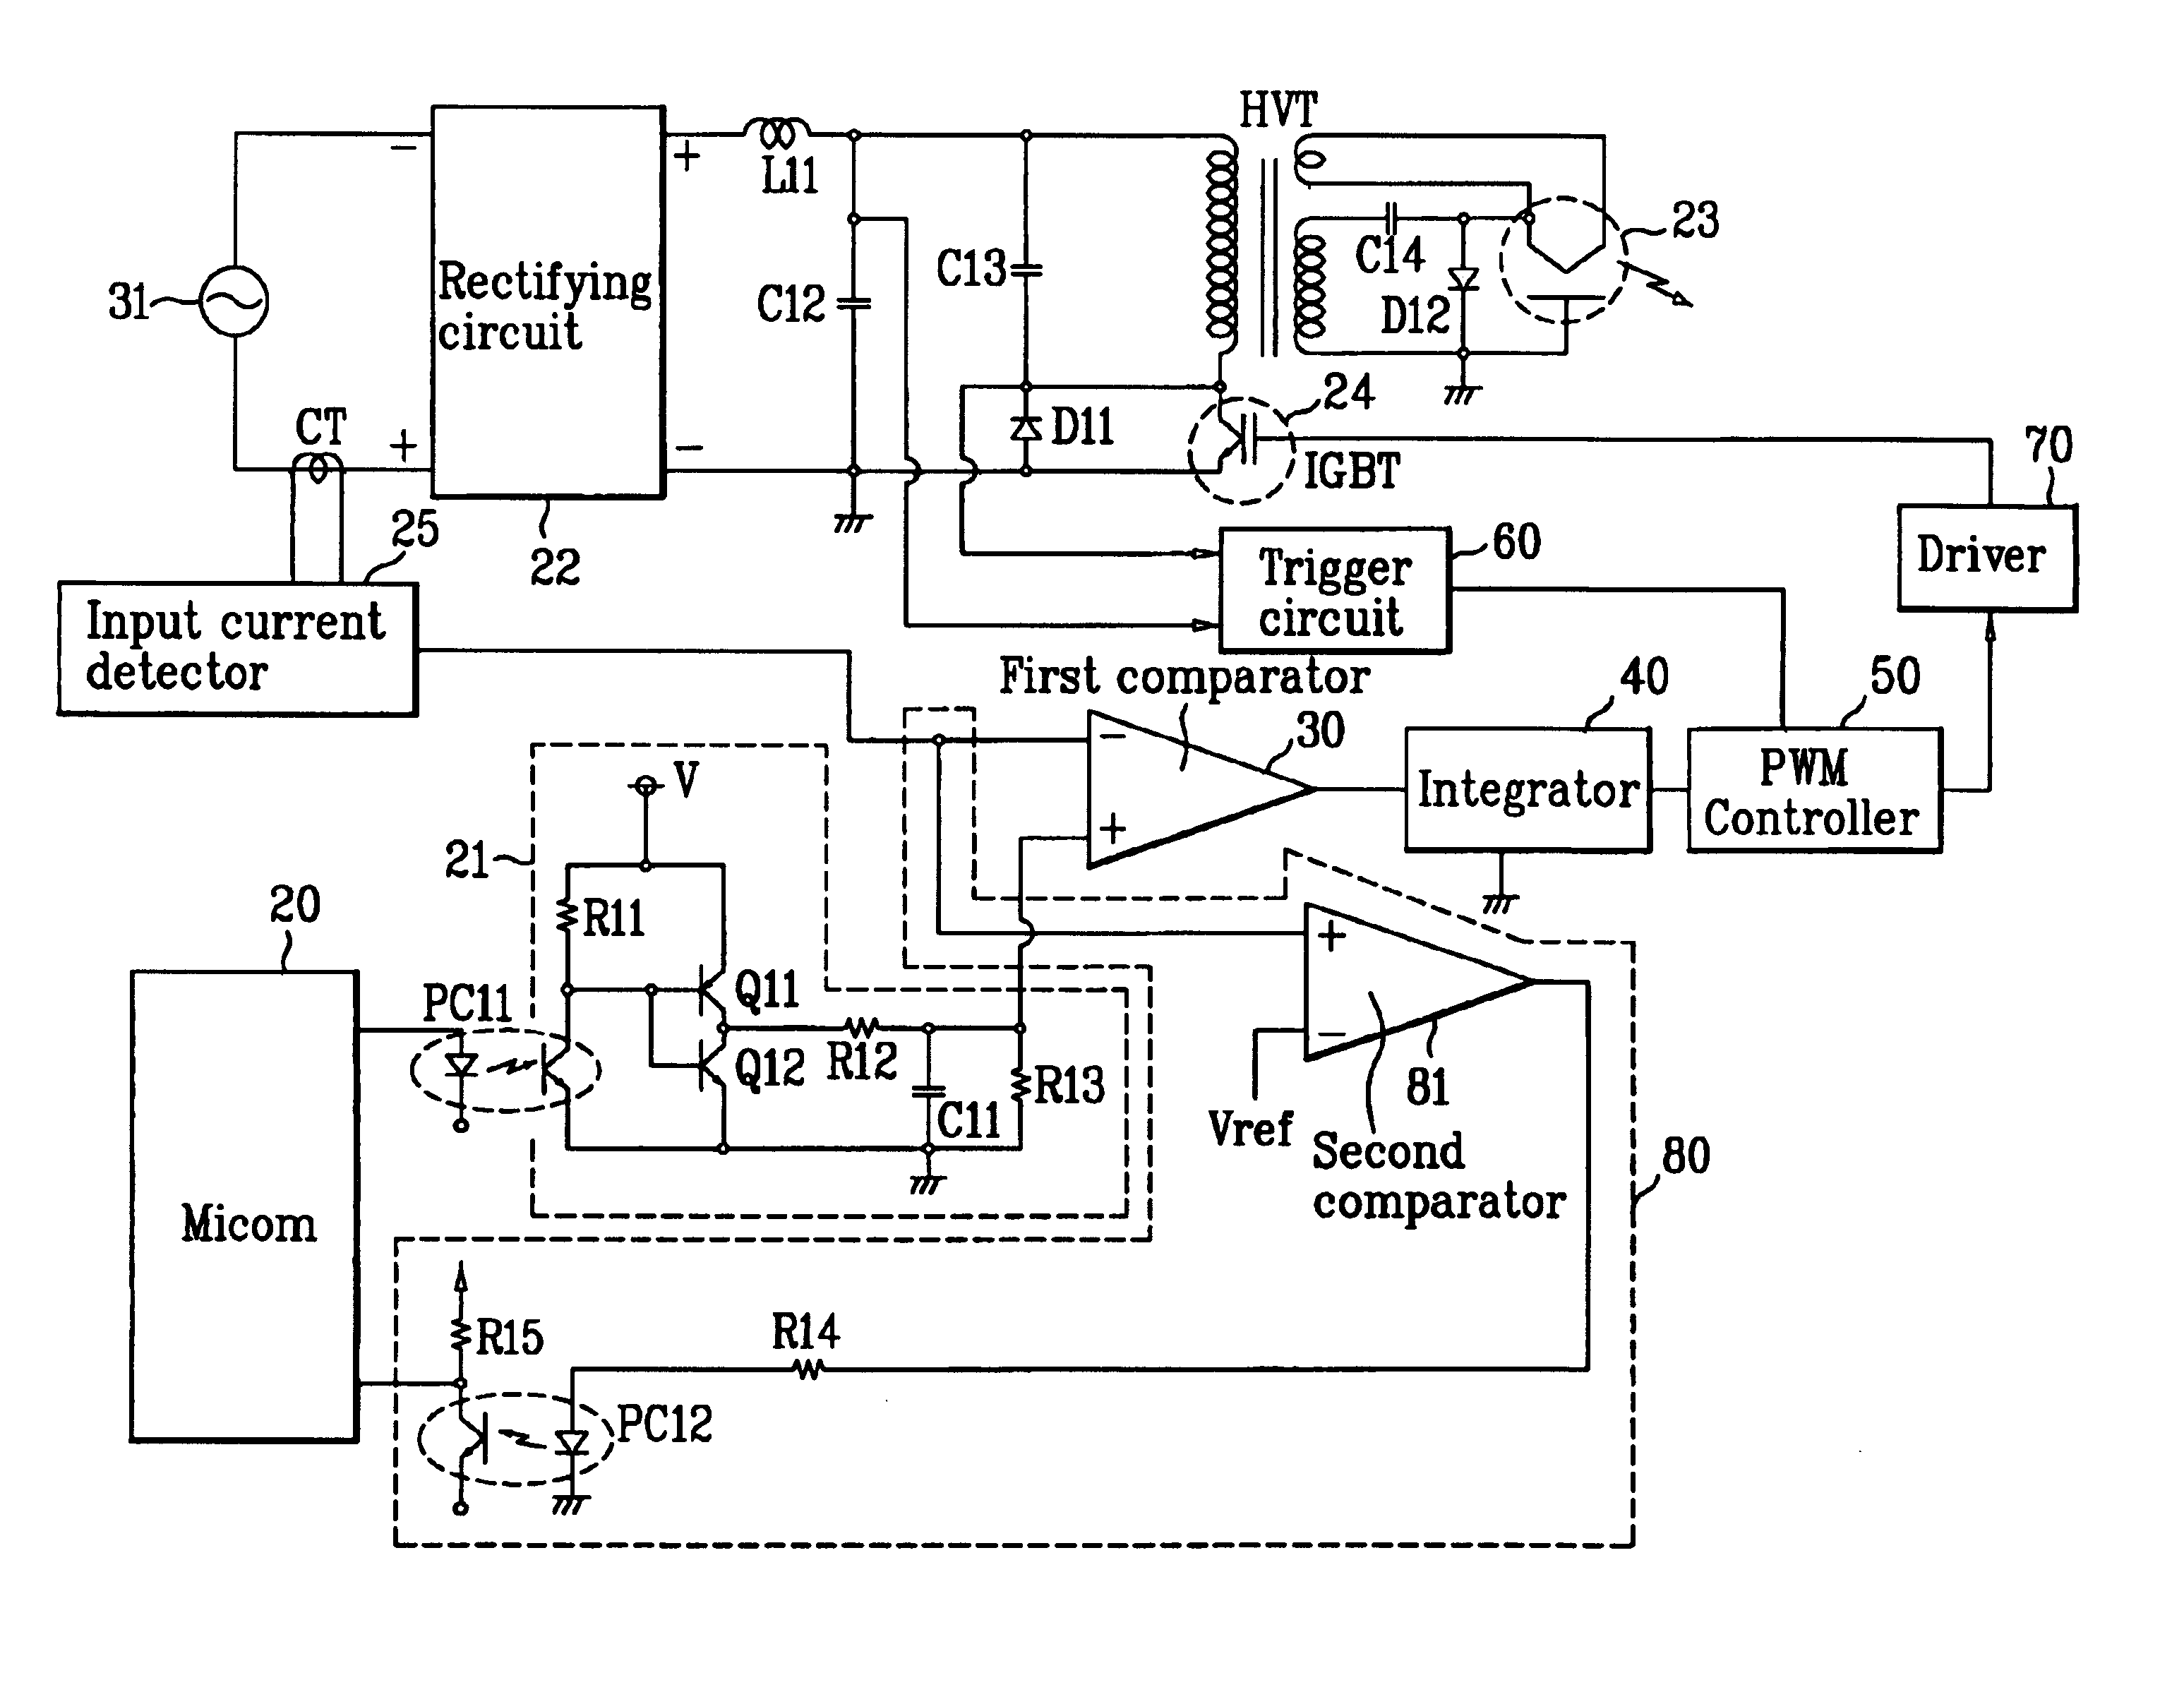 Inverter circuit of microwave oven